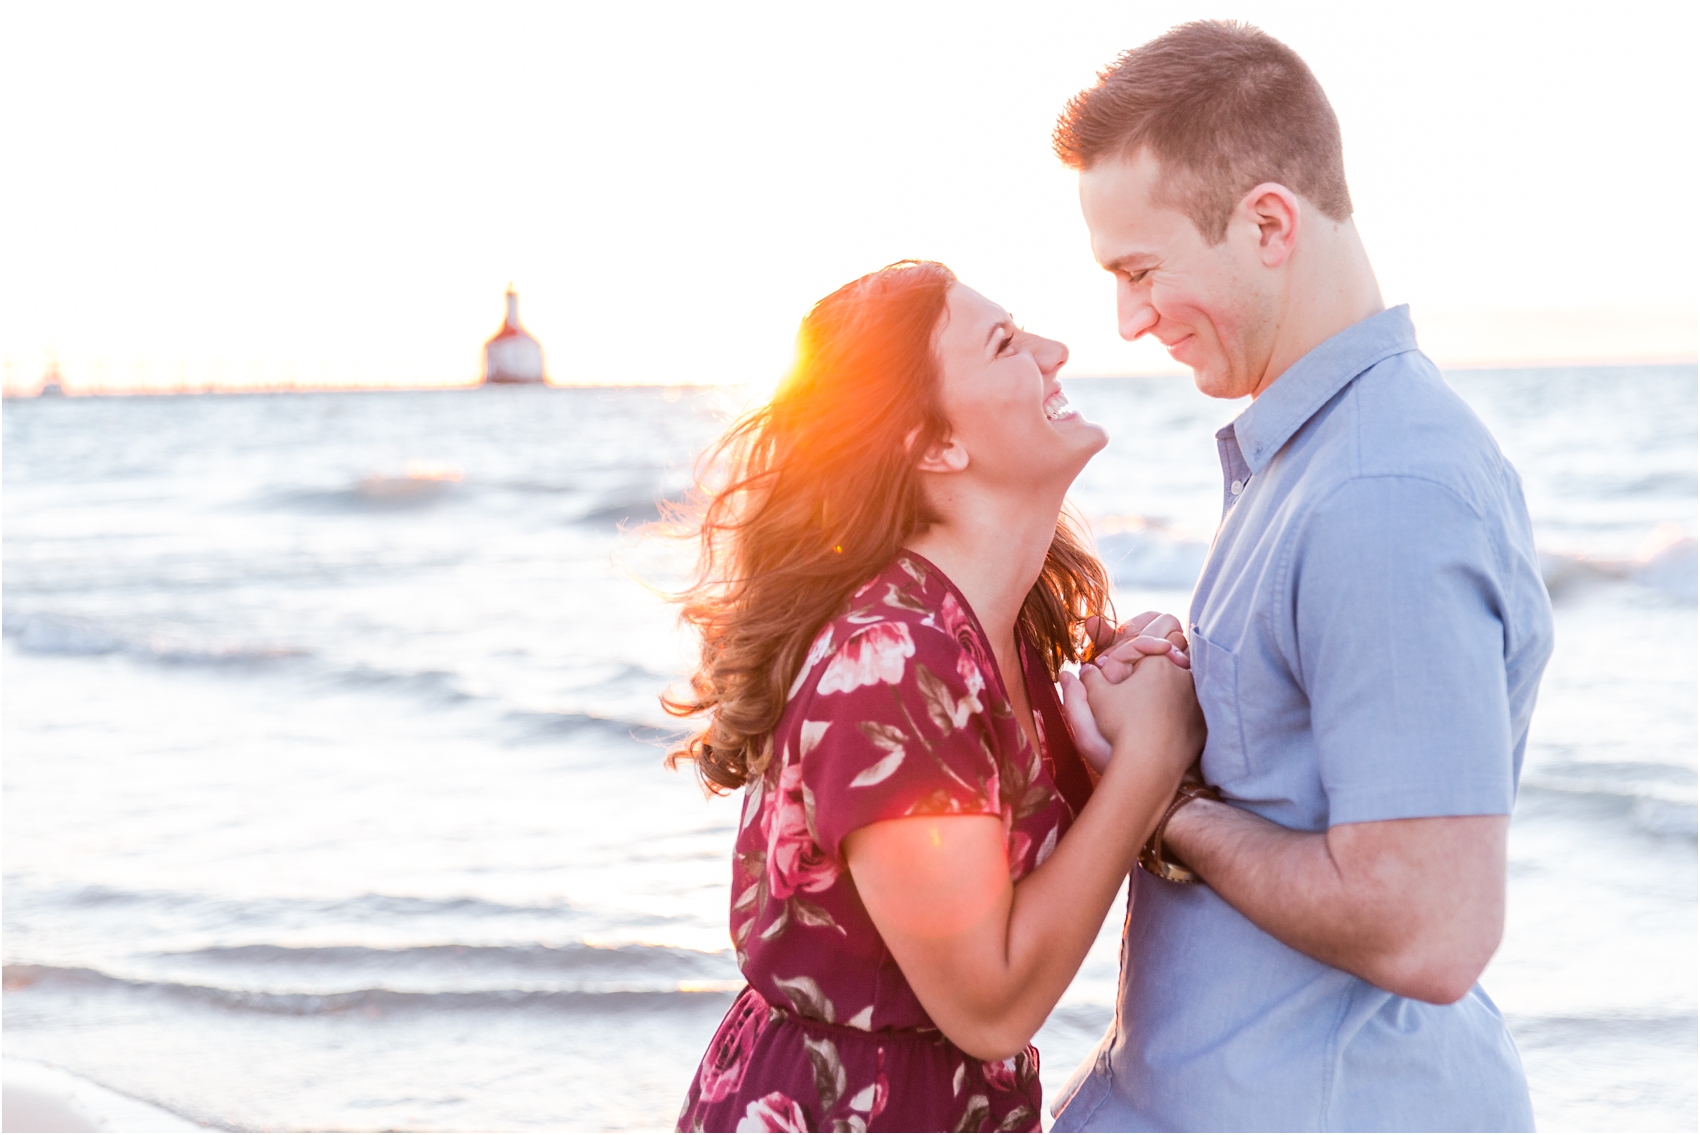 candid-end-of-summer-sunset-engagement-photos-at-silver-beach-in-st-joseph-mi-by-courtney-carolyn-photography_0035.jpg